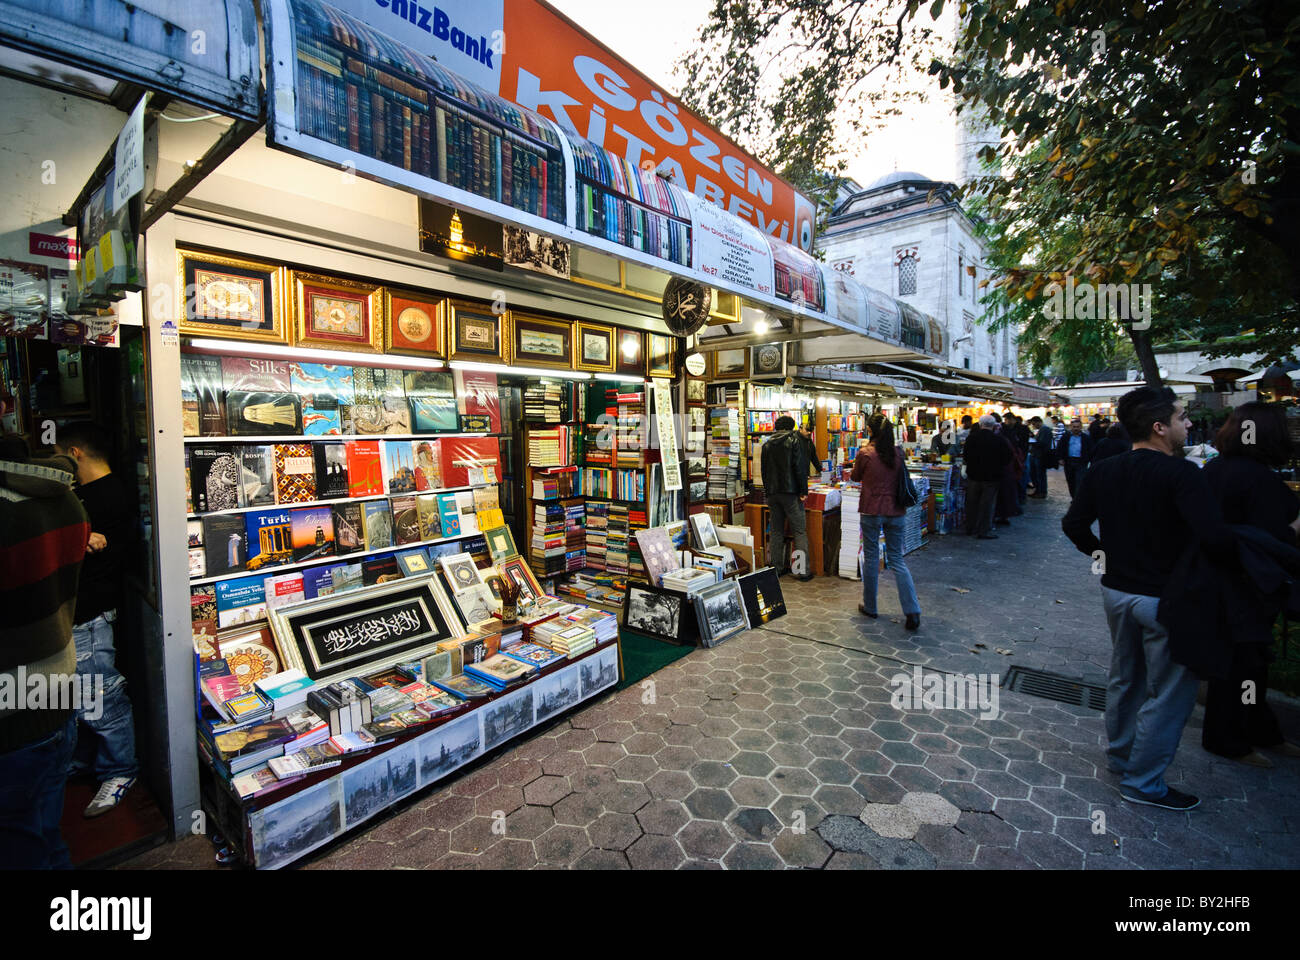 The historic Sahaflar Carsisi, next to Istanbul's Grand Bazaar, has sold books and literature for centuries. Stock Photo